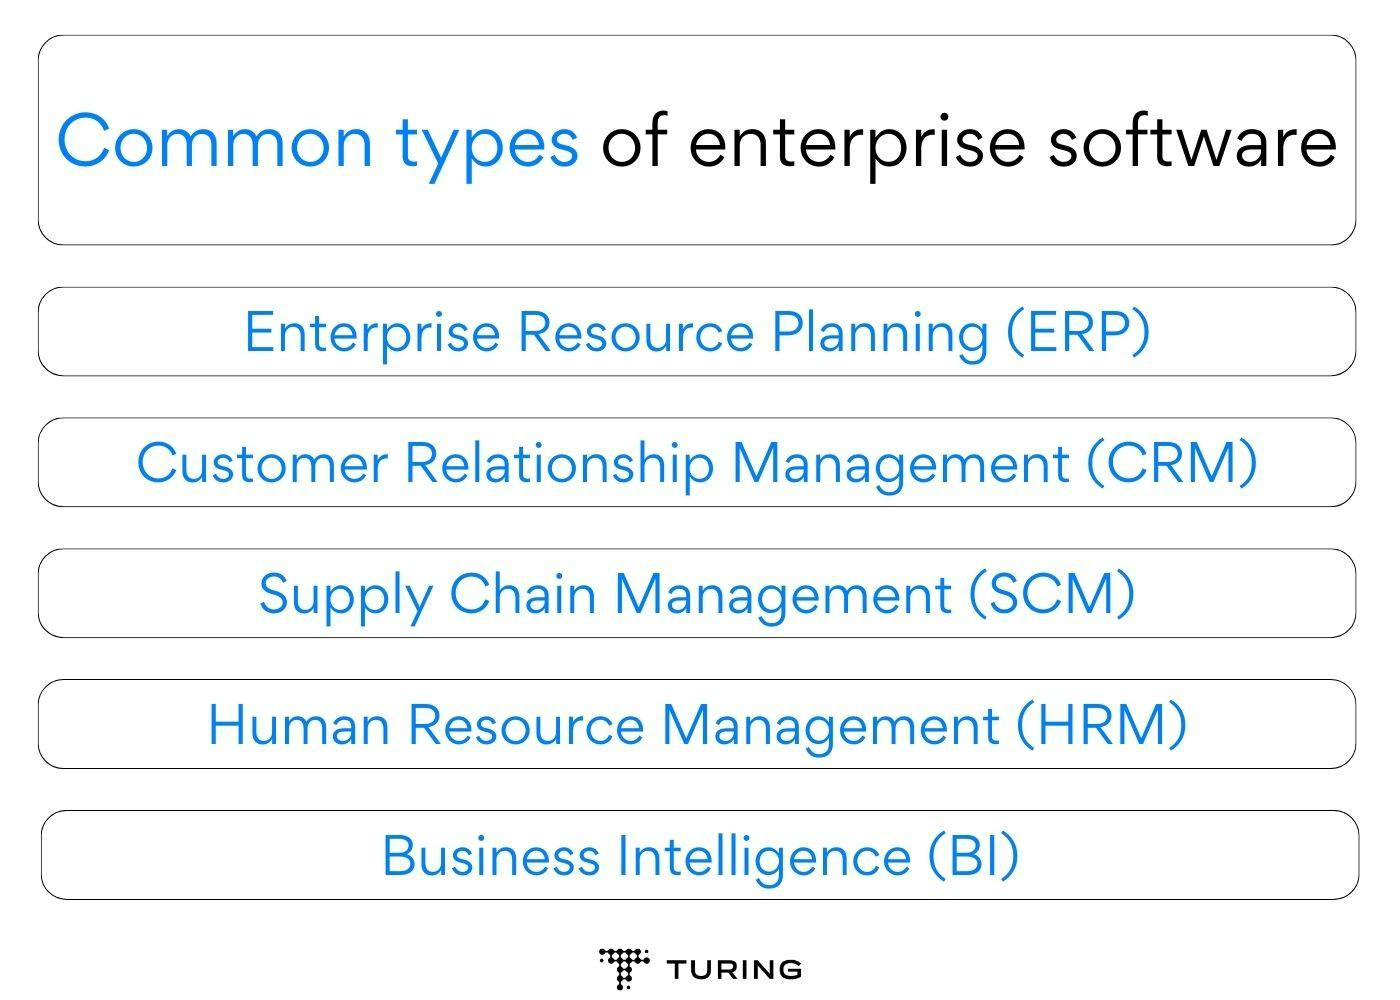 Common types of enterprise software